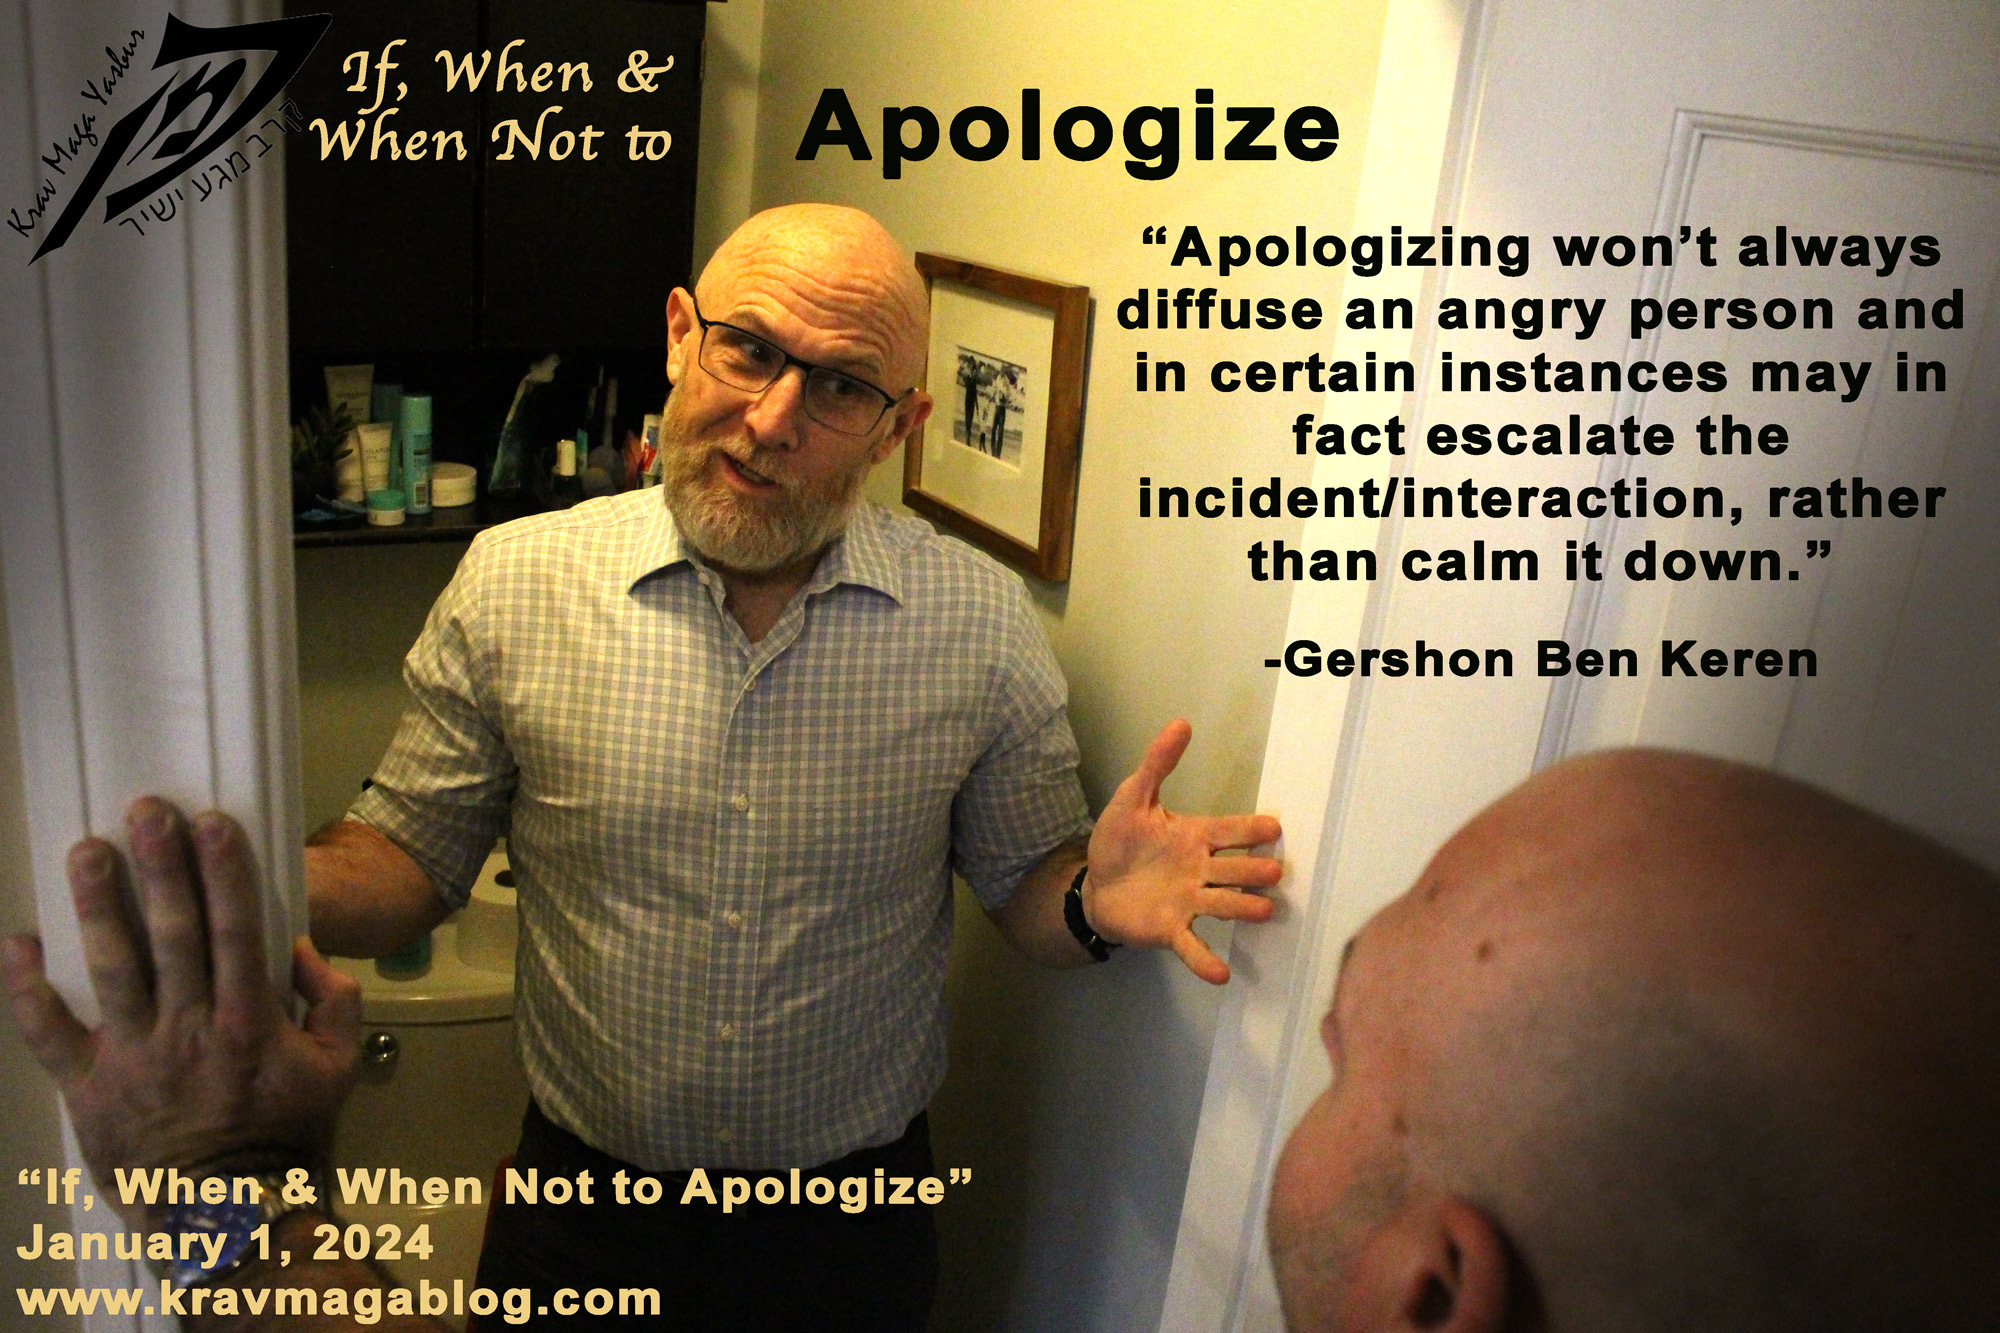 Blog About If, When & When Not to Apologize